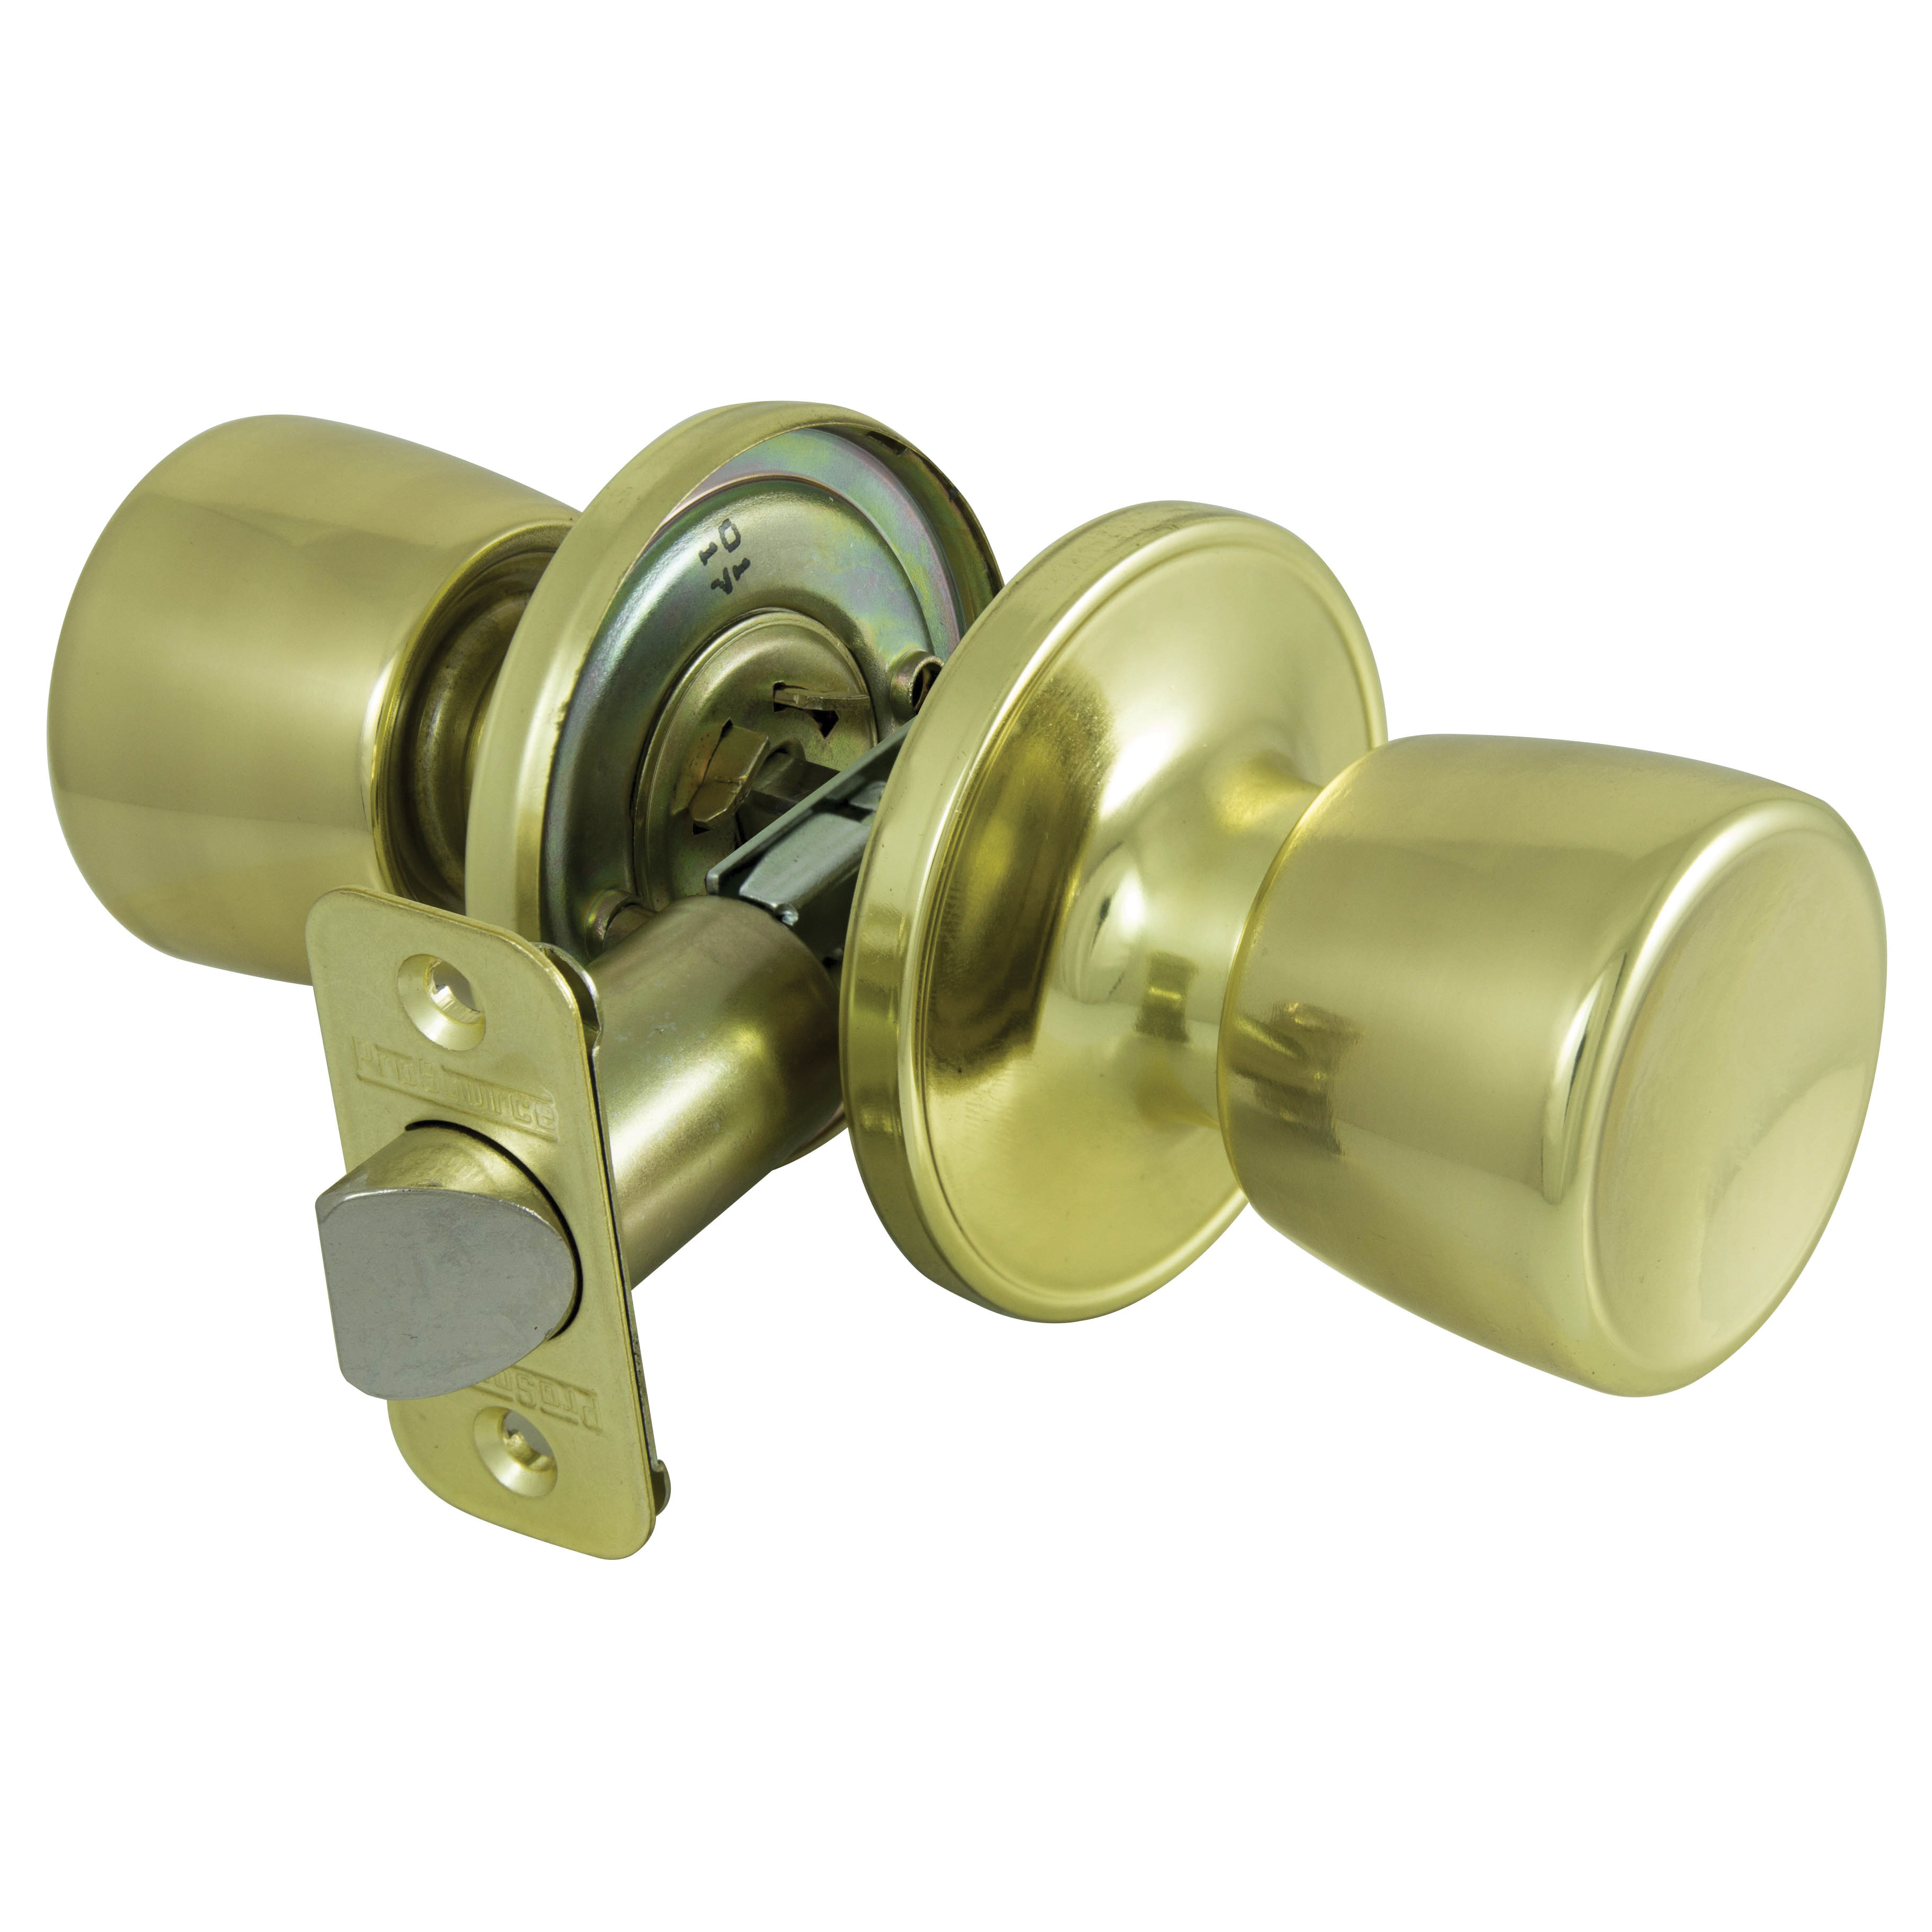 TS730BRA4B Passage Knob, Metal, Polished Brass, 2-3/8 to 2-3/4 in Backset, 1-3/8 to 1-3/4 in Thick Door